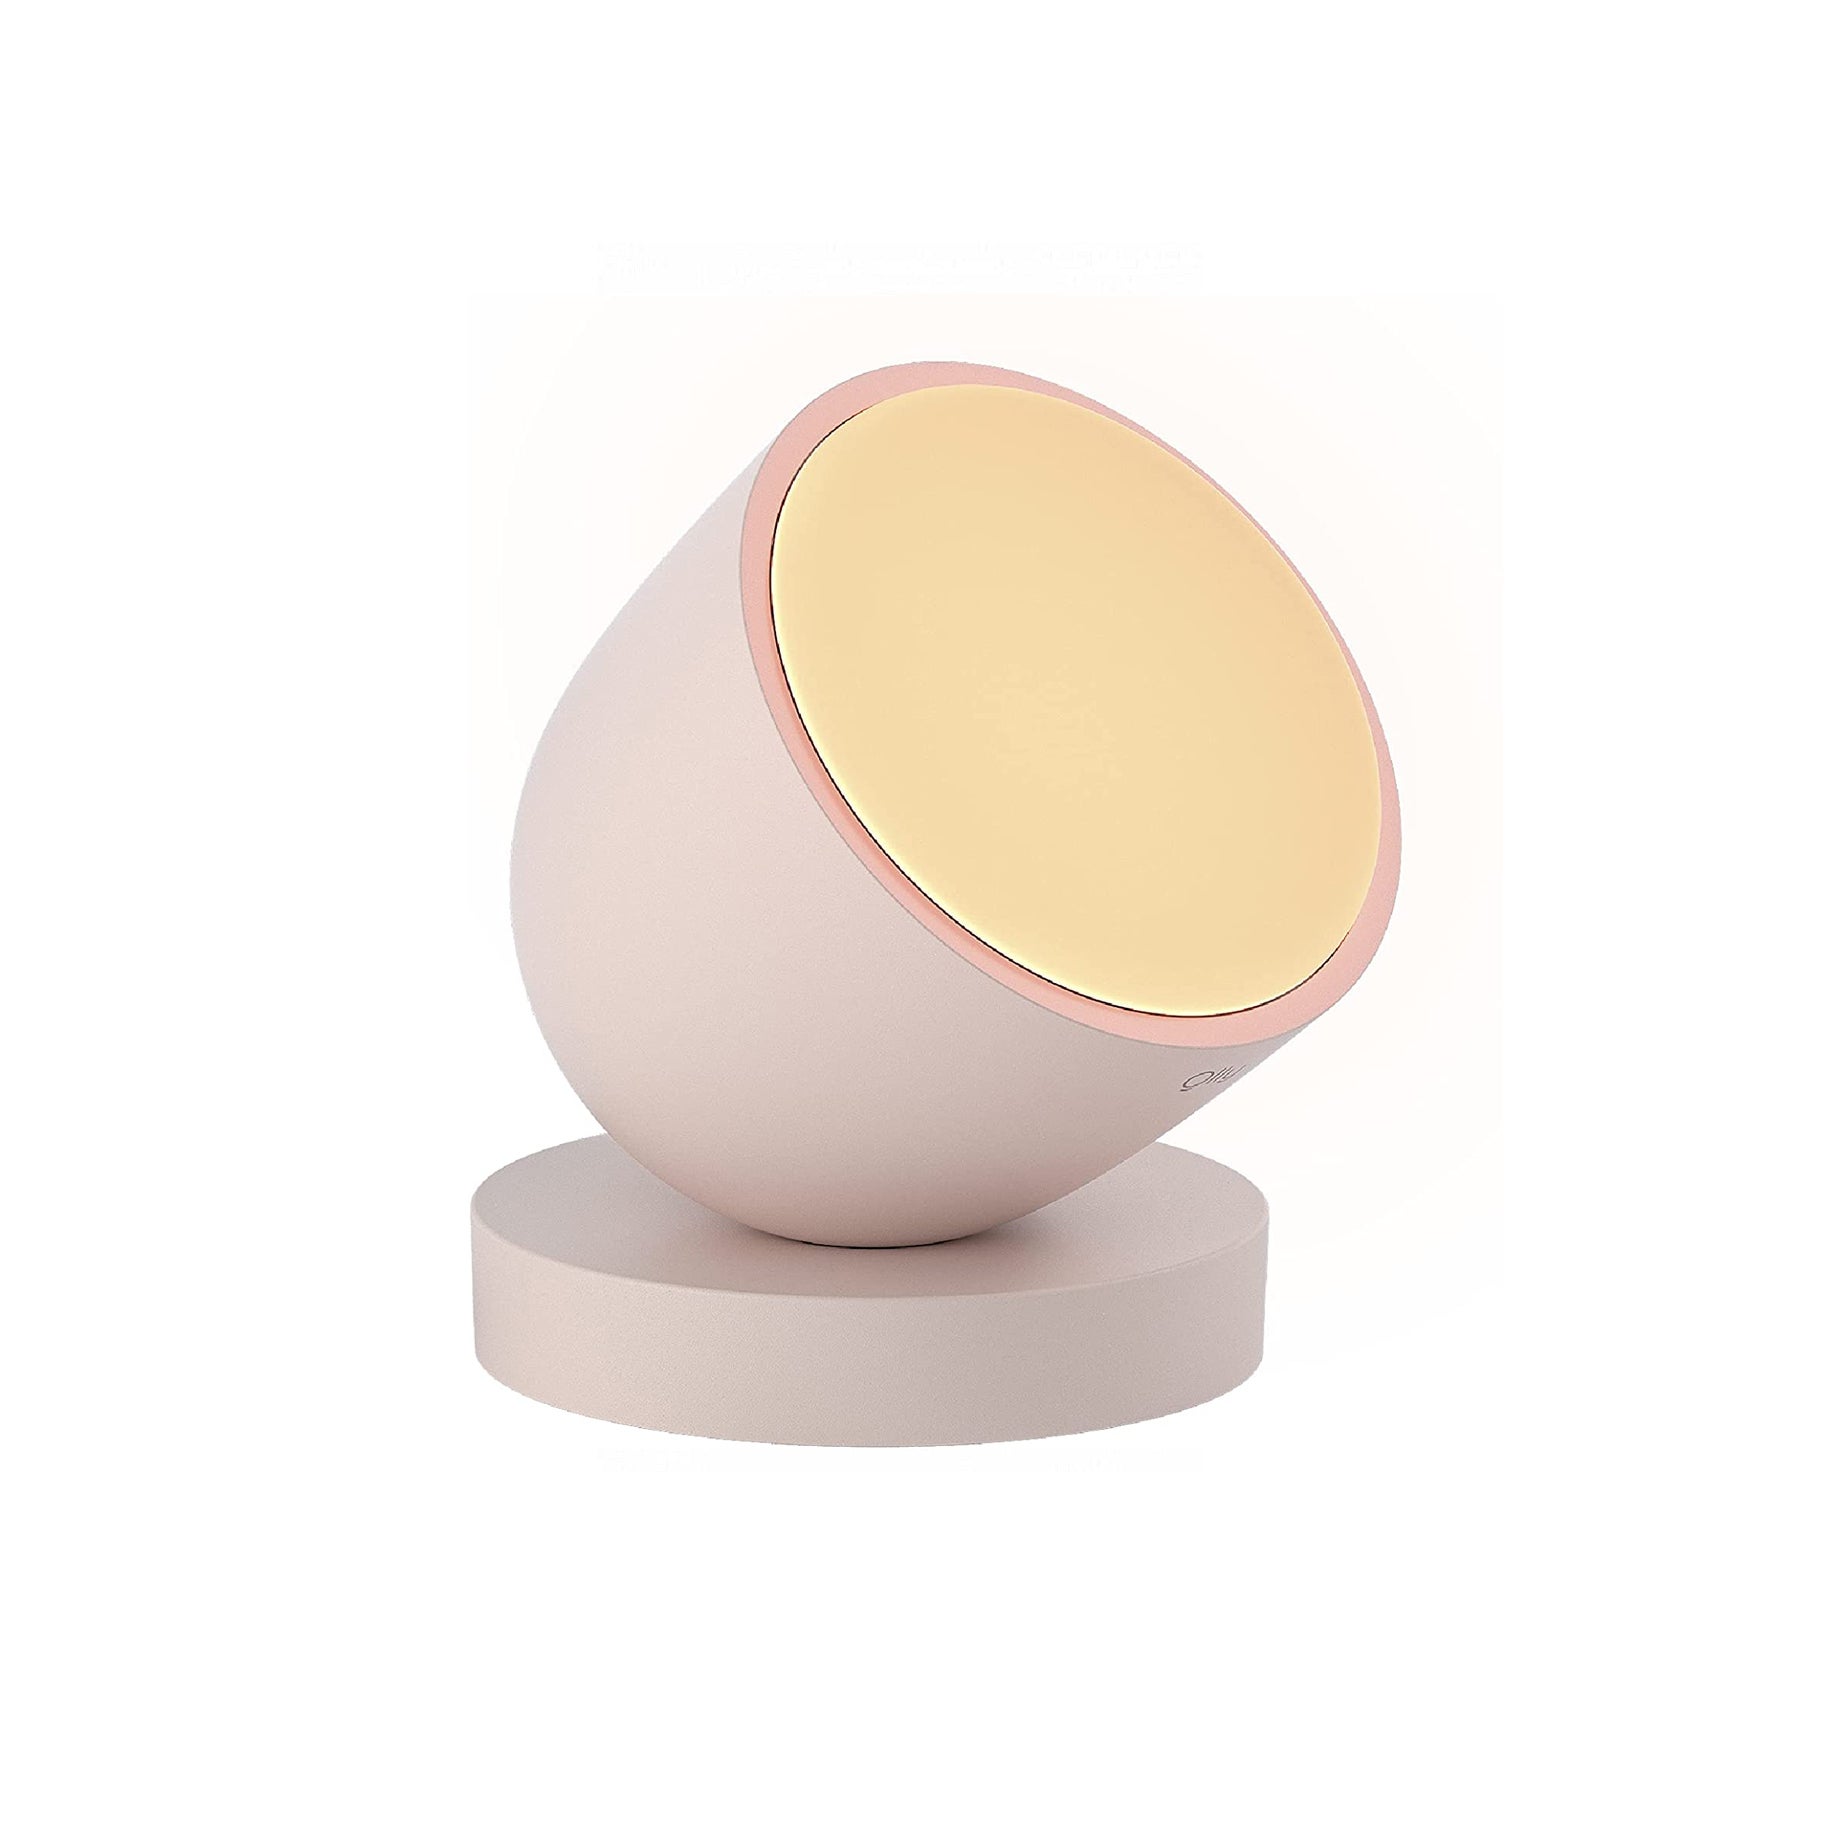 The Best Light Therapy Lamp Option: Olly Light Therapy Lamp